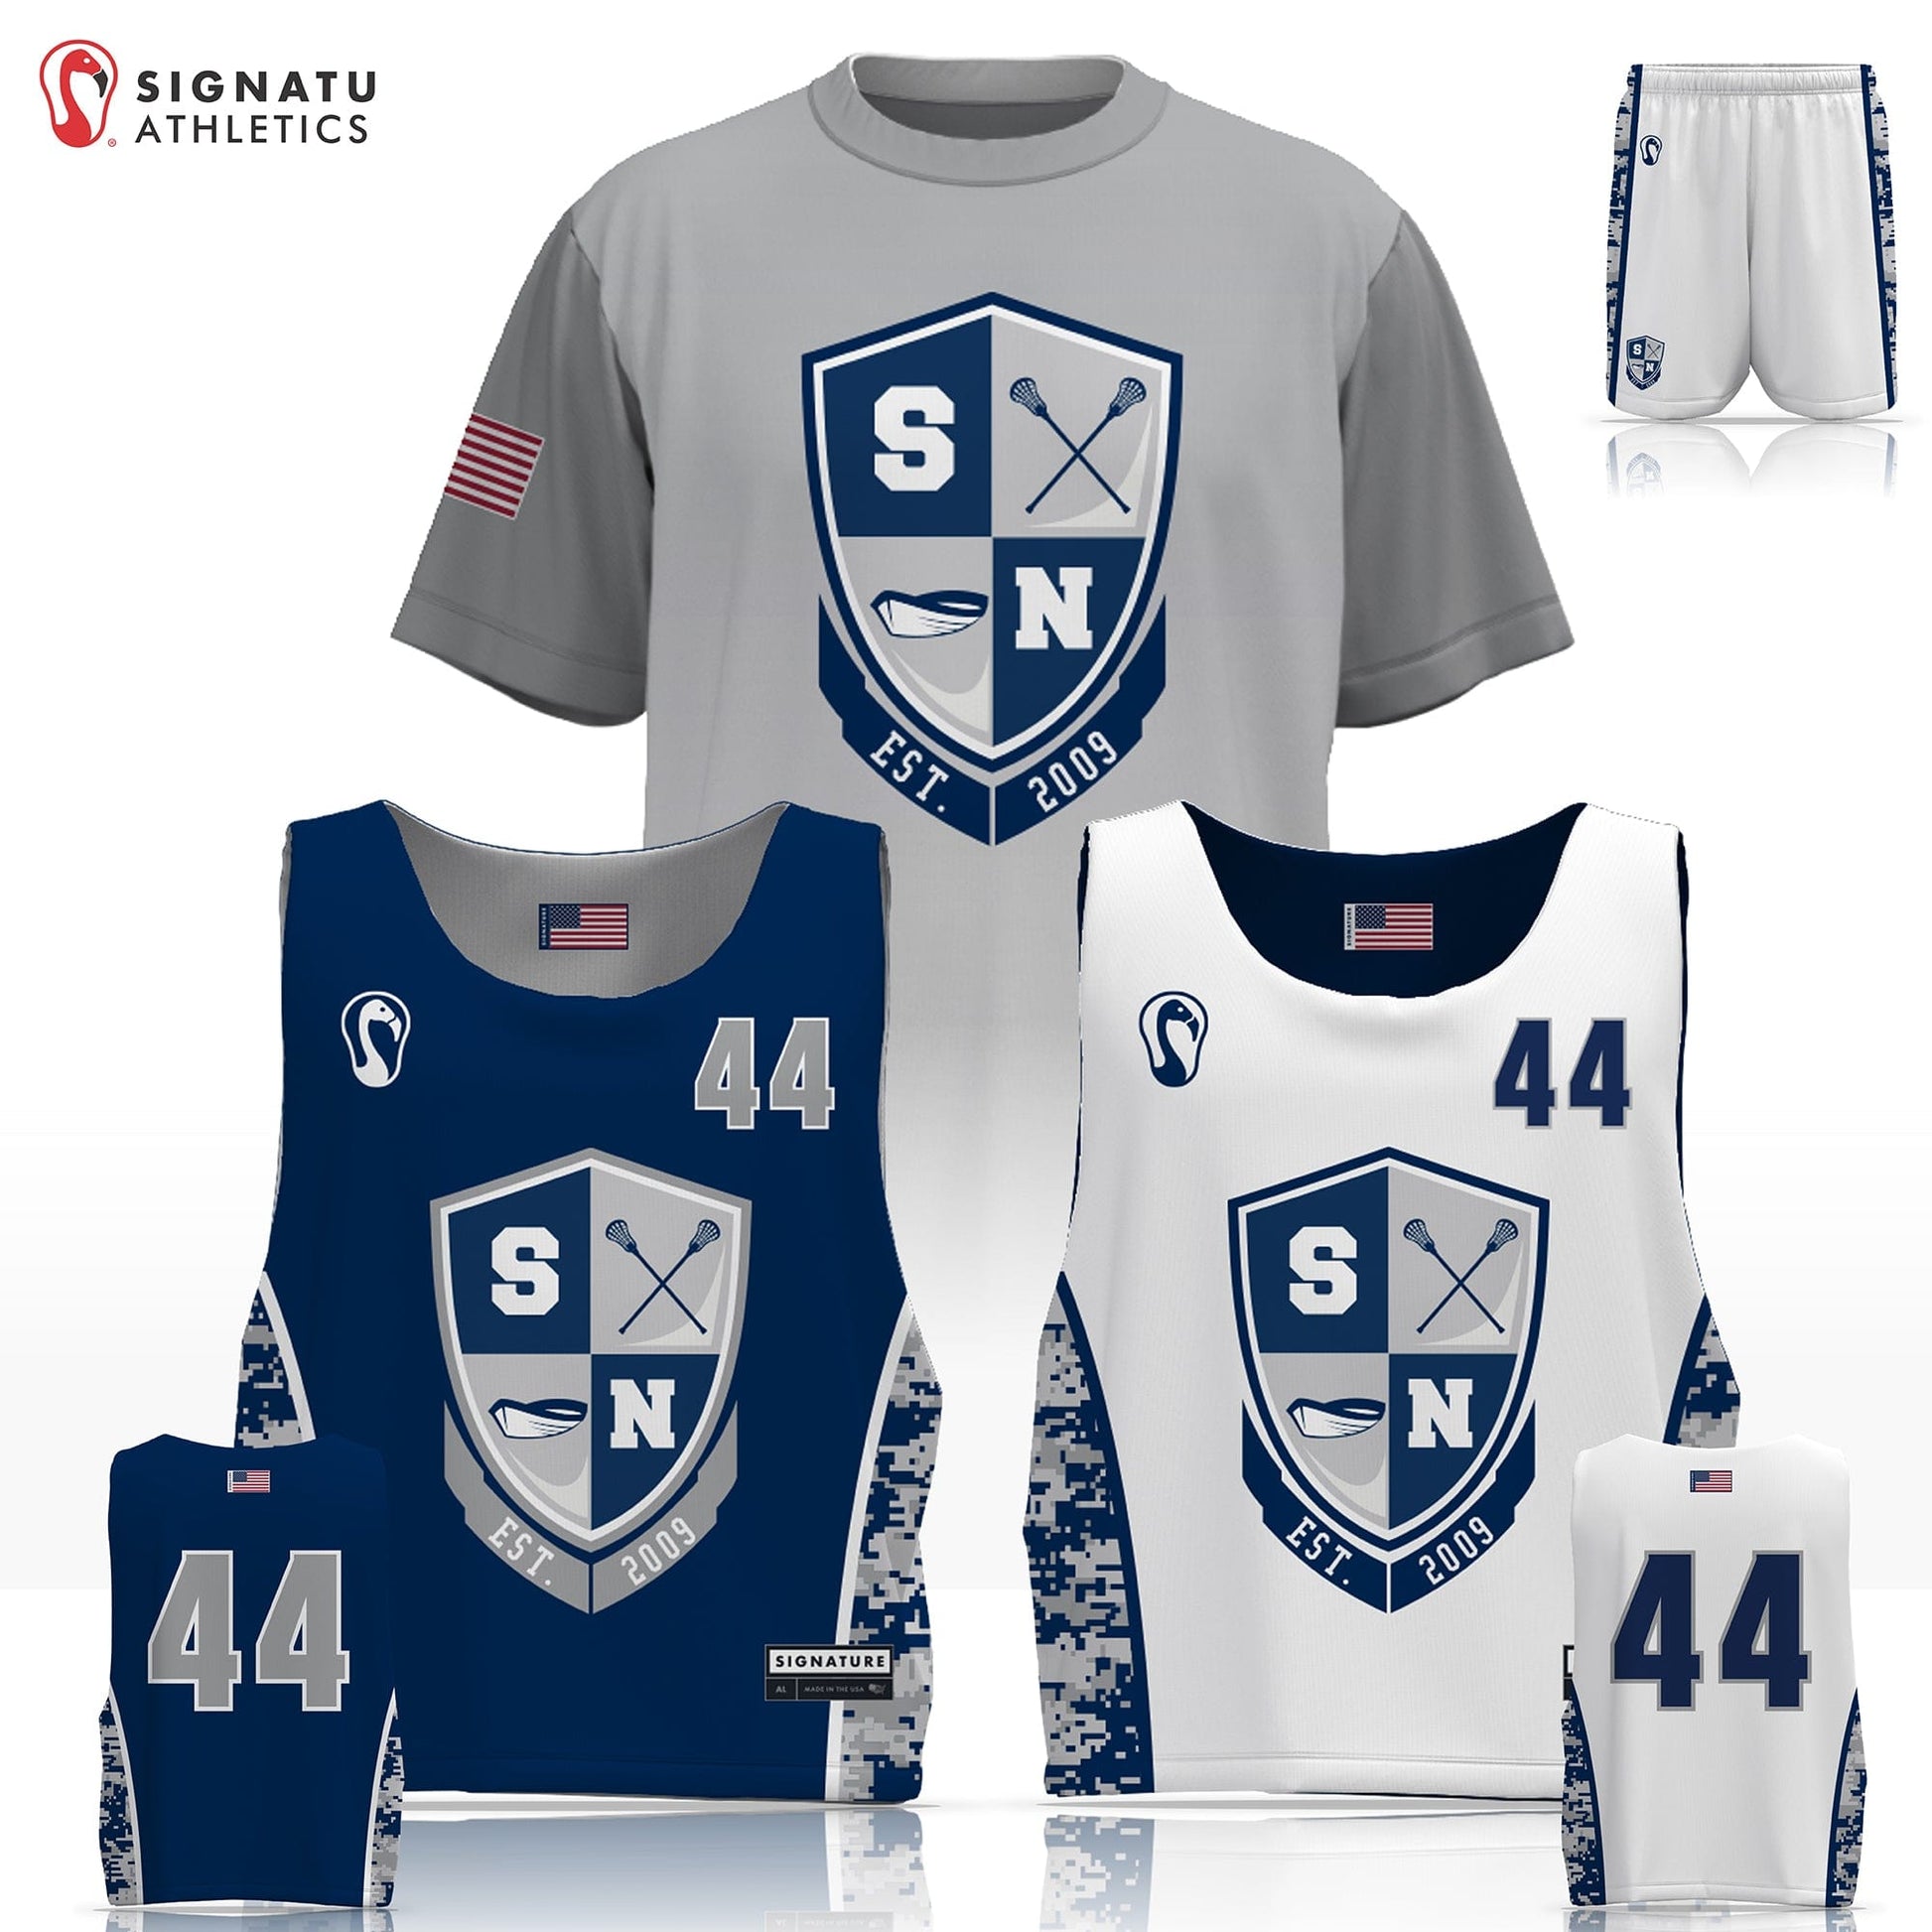 SNYL Team Swag Store Men's Performance 3 Piece Game Package - Basic Signature Lacrosse